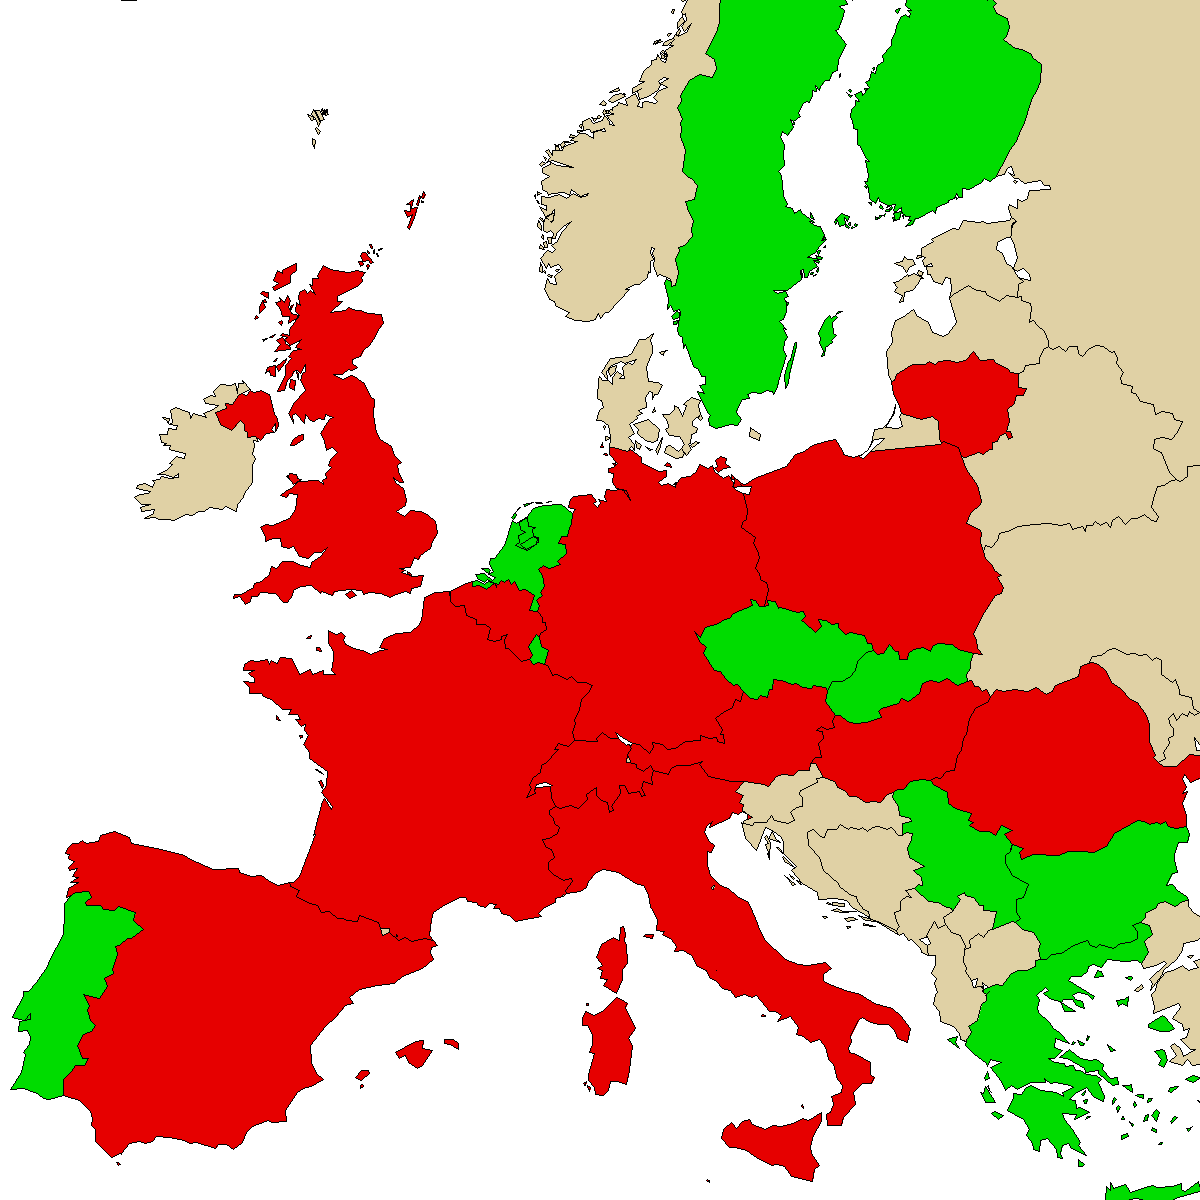 legal info map for our product 4Me-NEB, green are countries with no ban, red with ban, grey is unknown